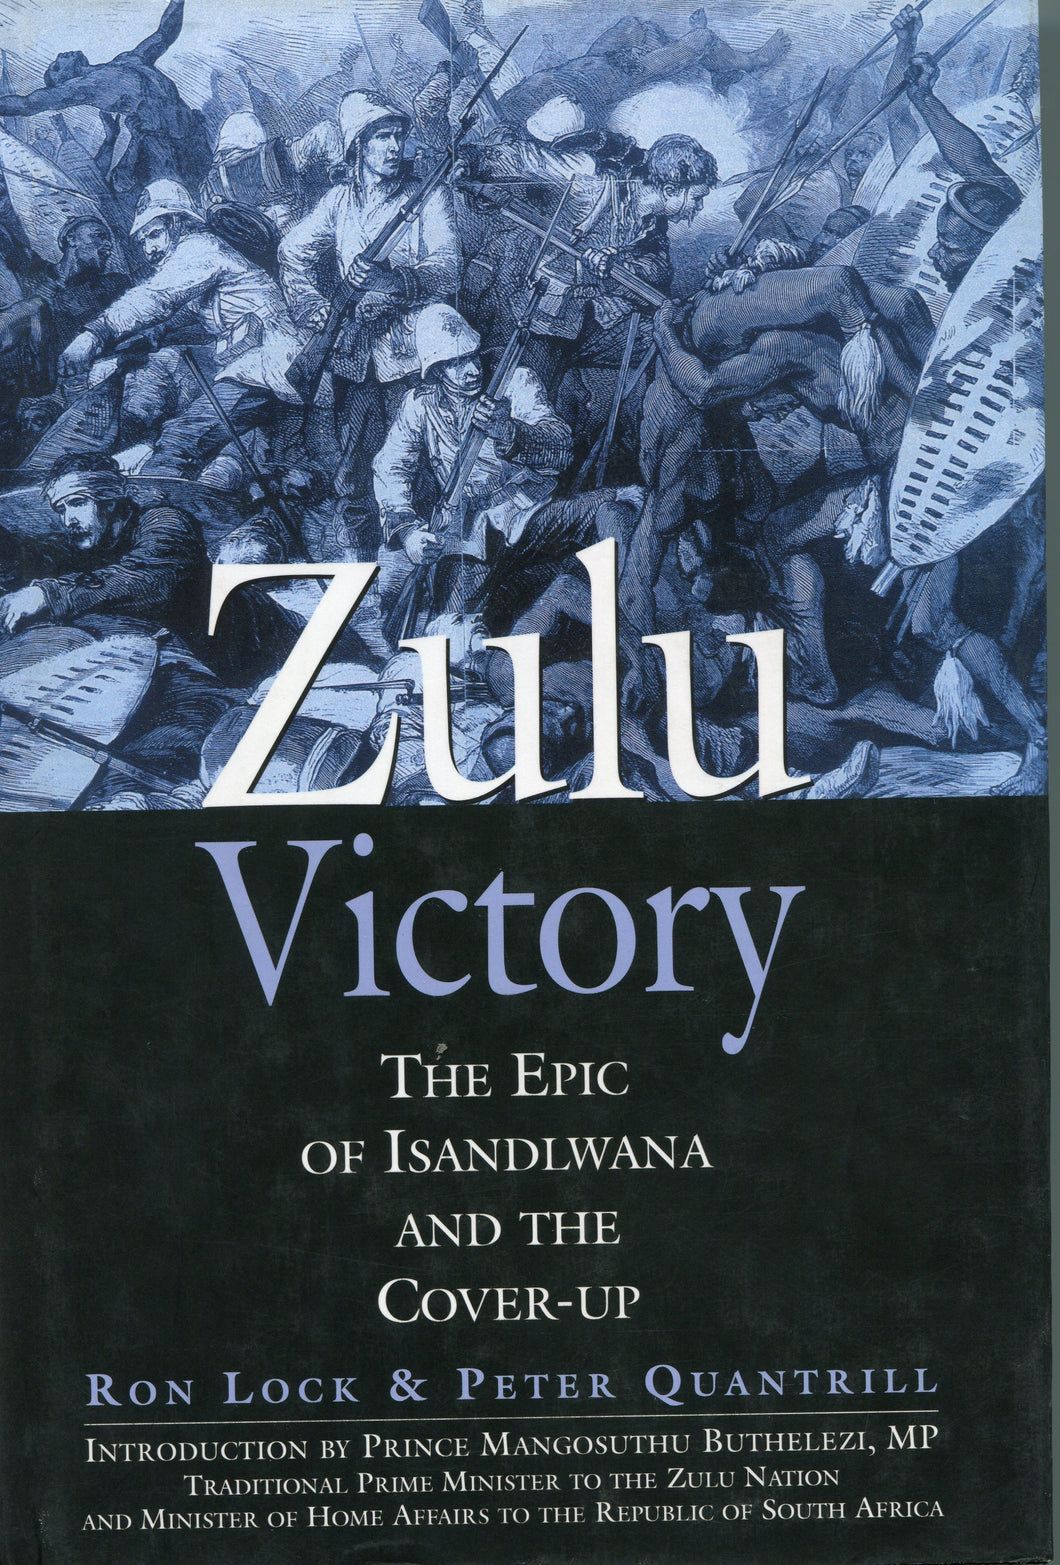 'ZULU VICTORY; The Epic of Isandlwana and the Cover-Up' by Ron Lock and Peter Quantrill